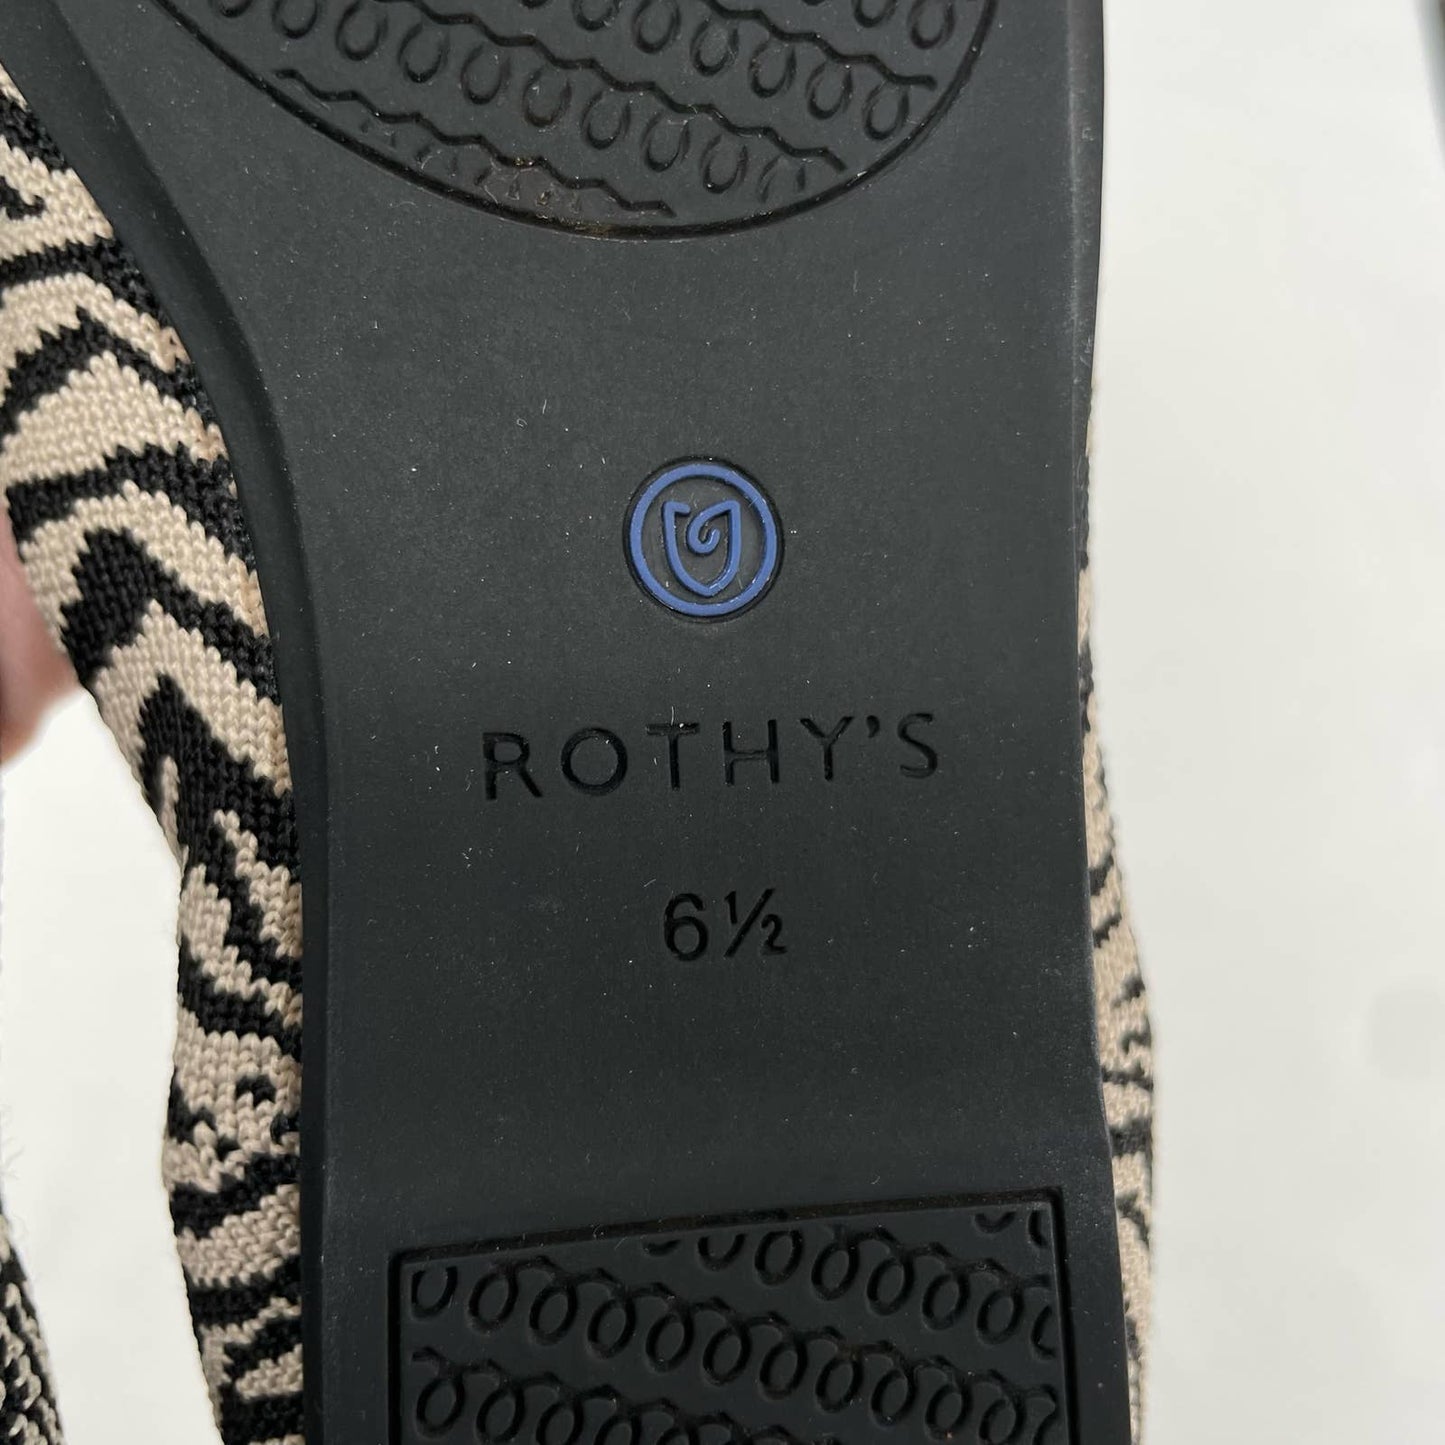 Rothy’s The Flat in Black Zebra Neutral Tapue Tan Printed Sustainable Flats Size 6.5